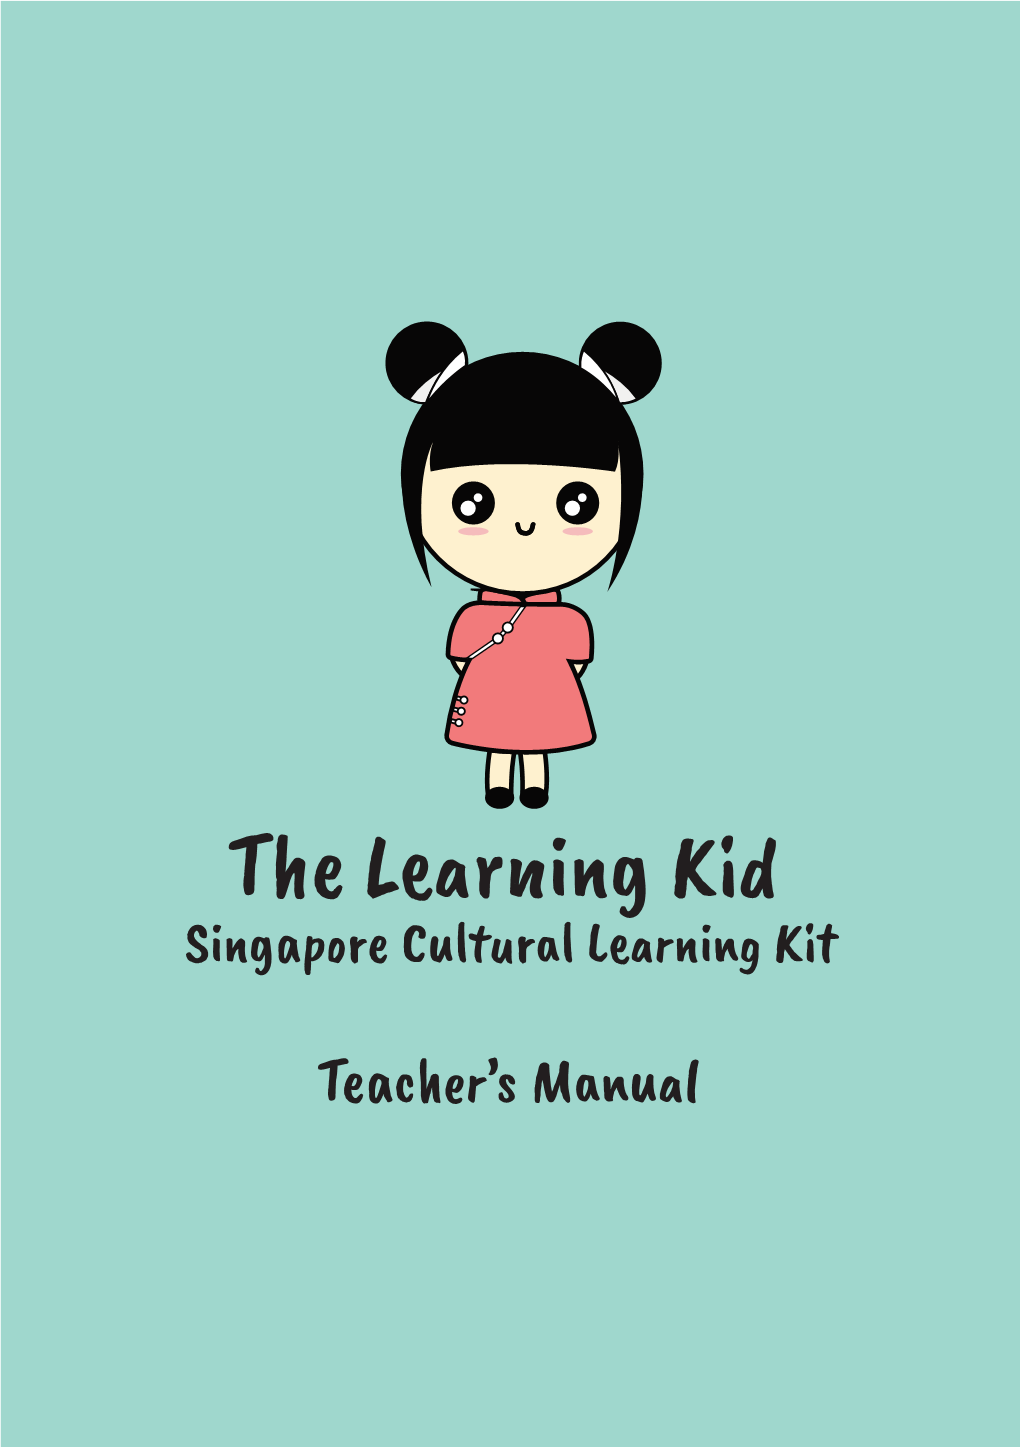 The Learning Kid Singapore Cultural Learning Kit